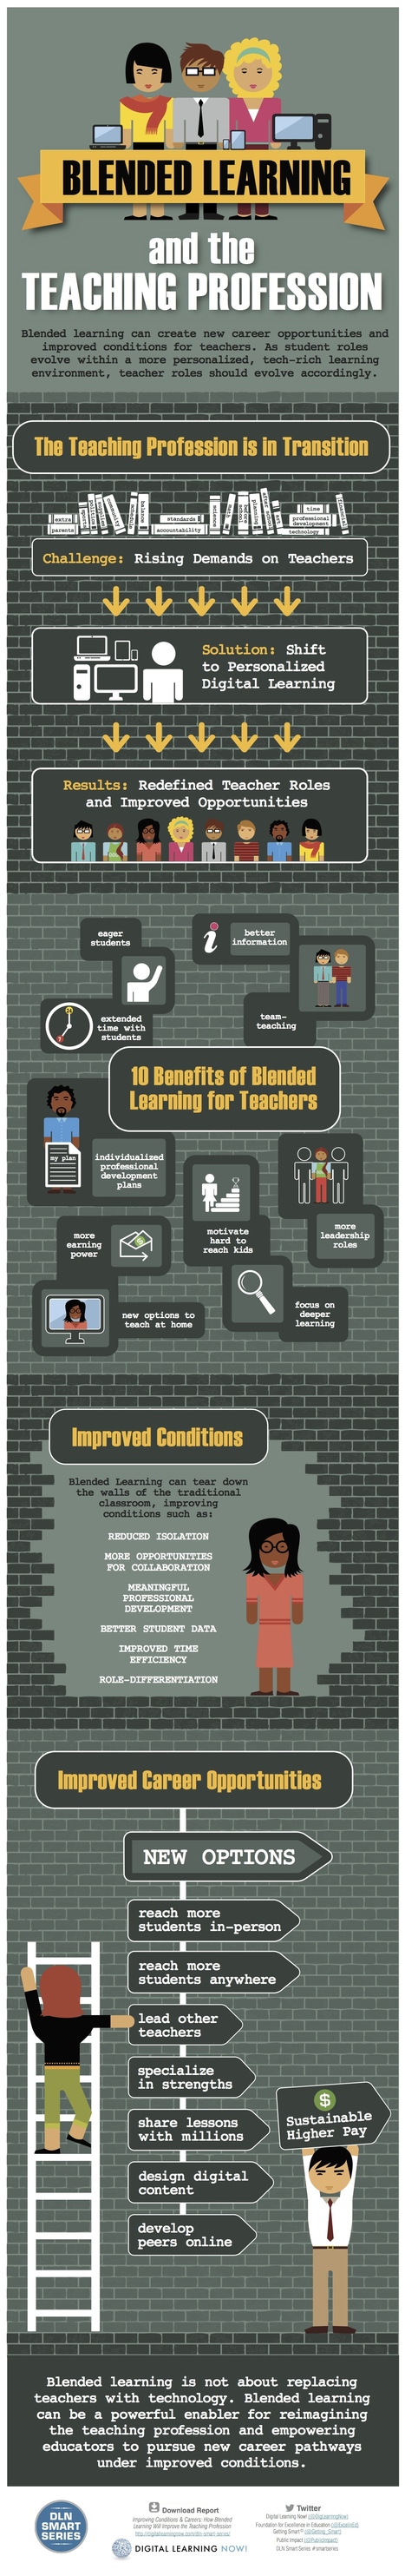 Blended Learning & The Teaching Profession [Infographic] | Tice & Co | Scoop.it